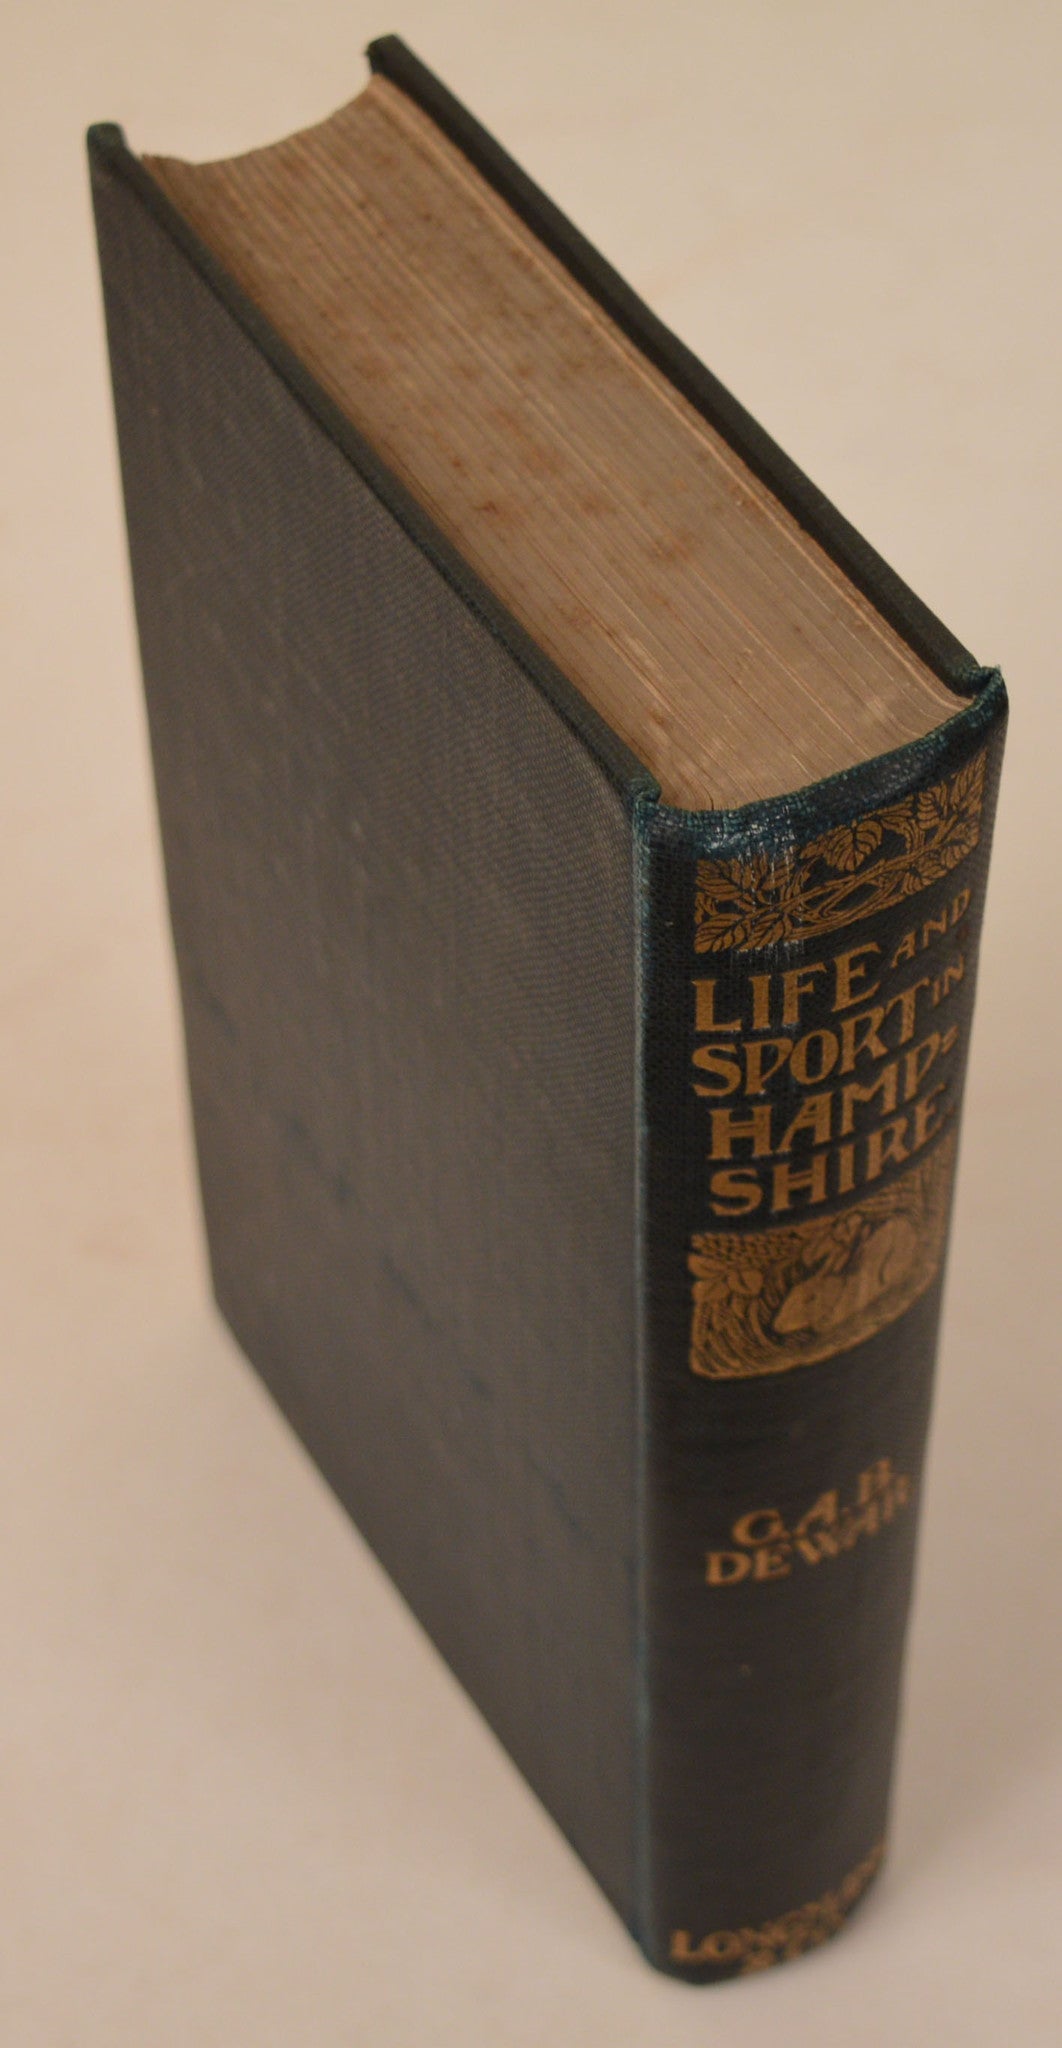 Life and Sport in Hampshire by George Dewar, Illustrated by Archibald Thorburn, 1908